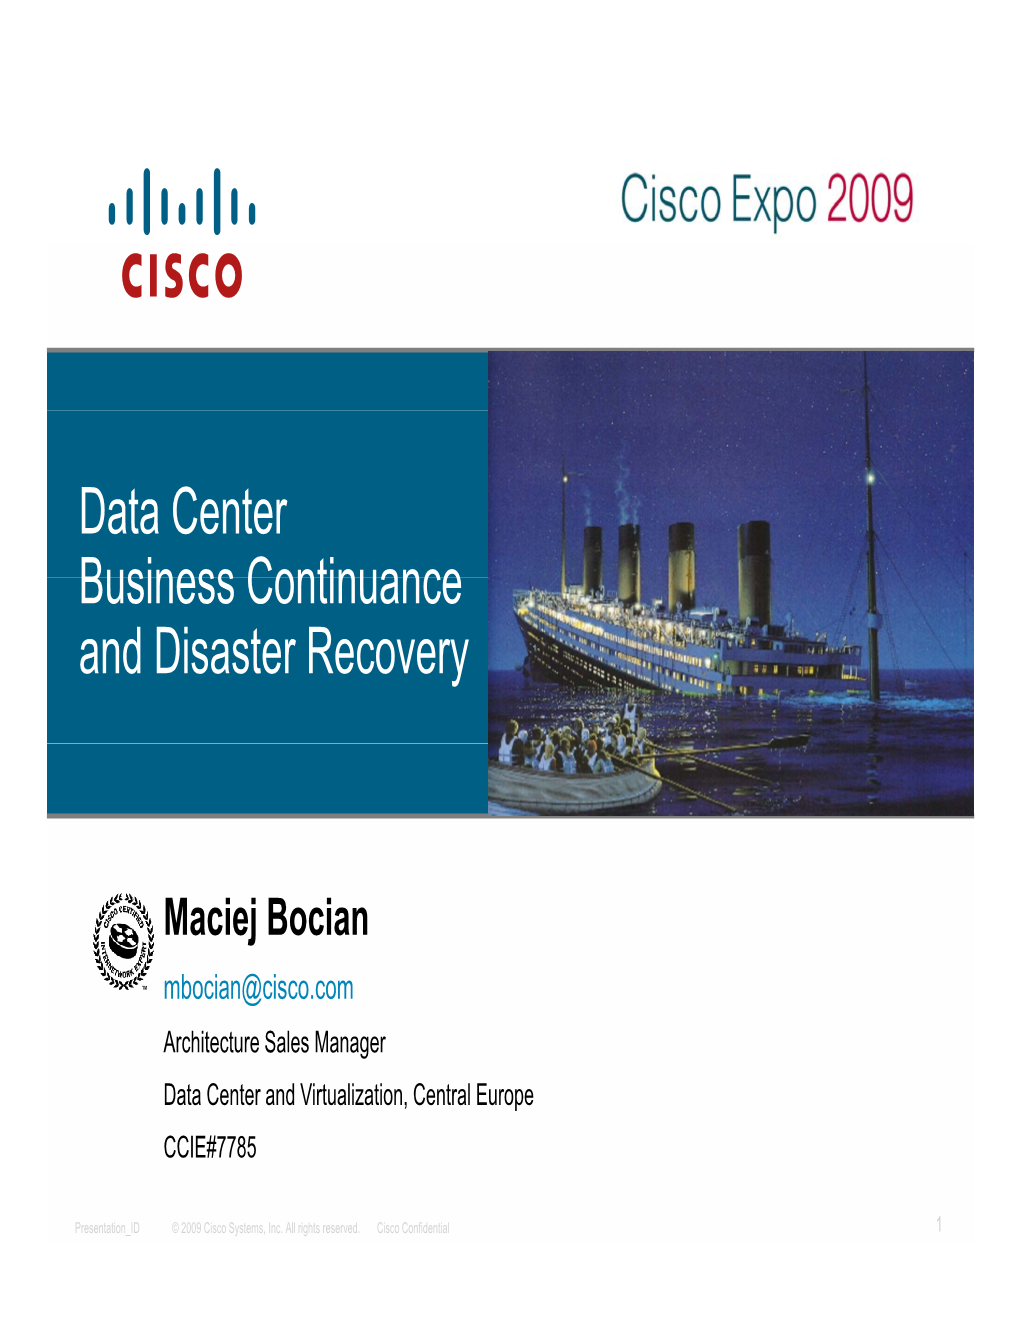 Data Center Business Continuance and Disaster Recovery